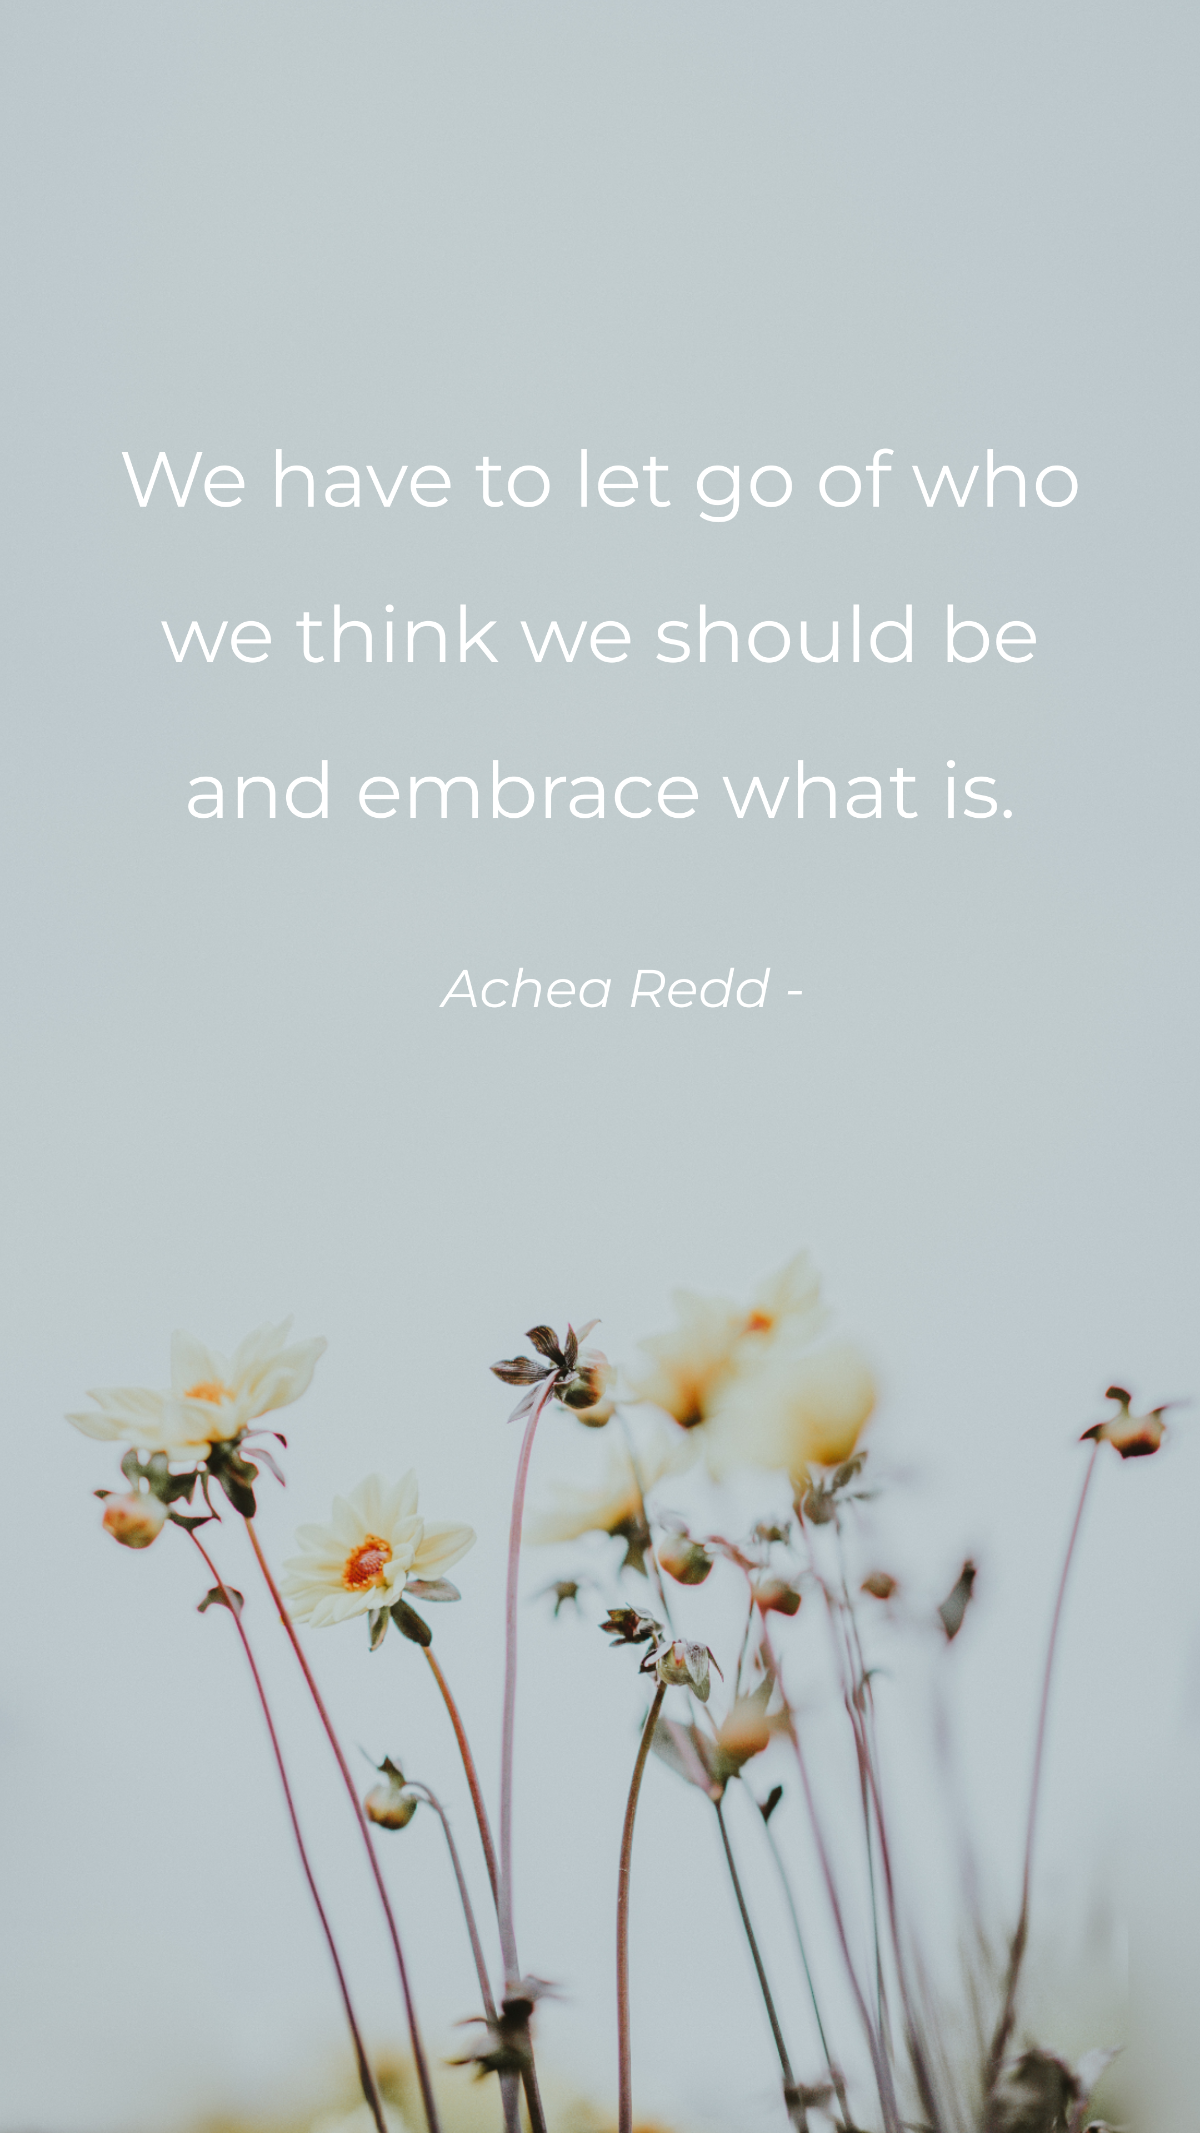 Achea Redd - We have to let go of who we think we should be and embrace what is. Template